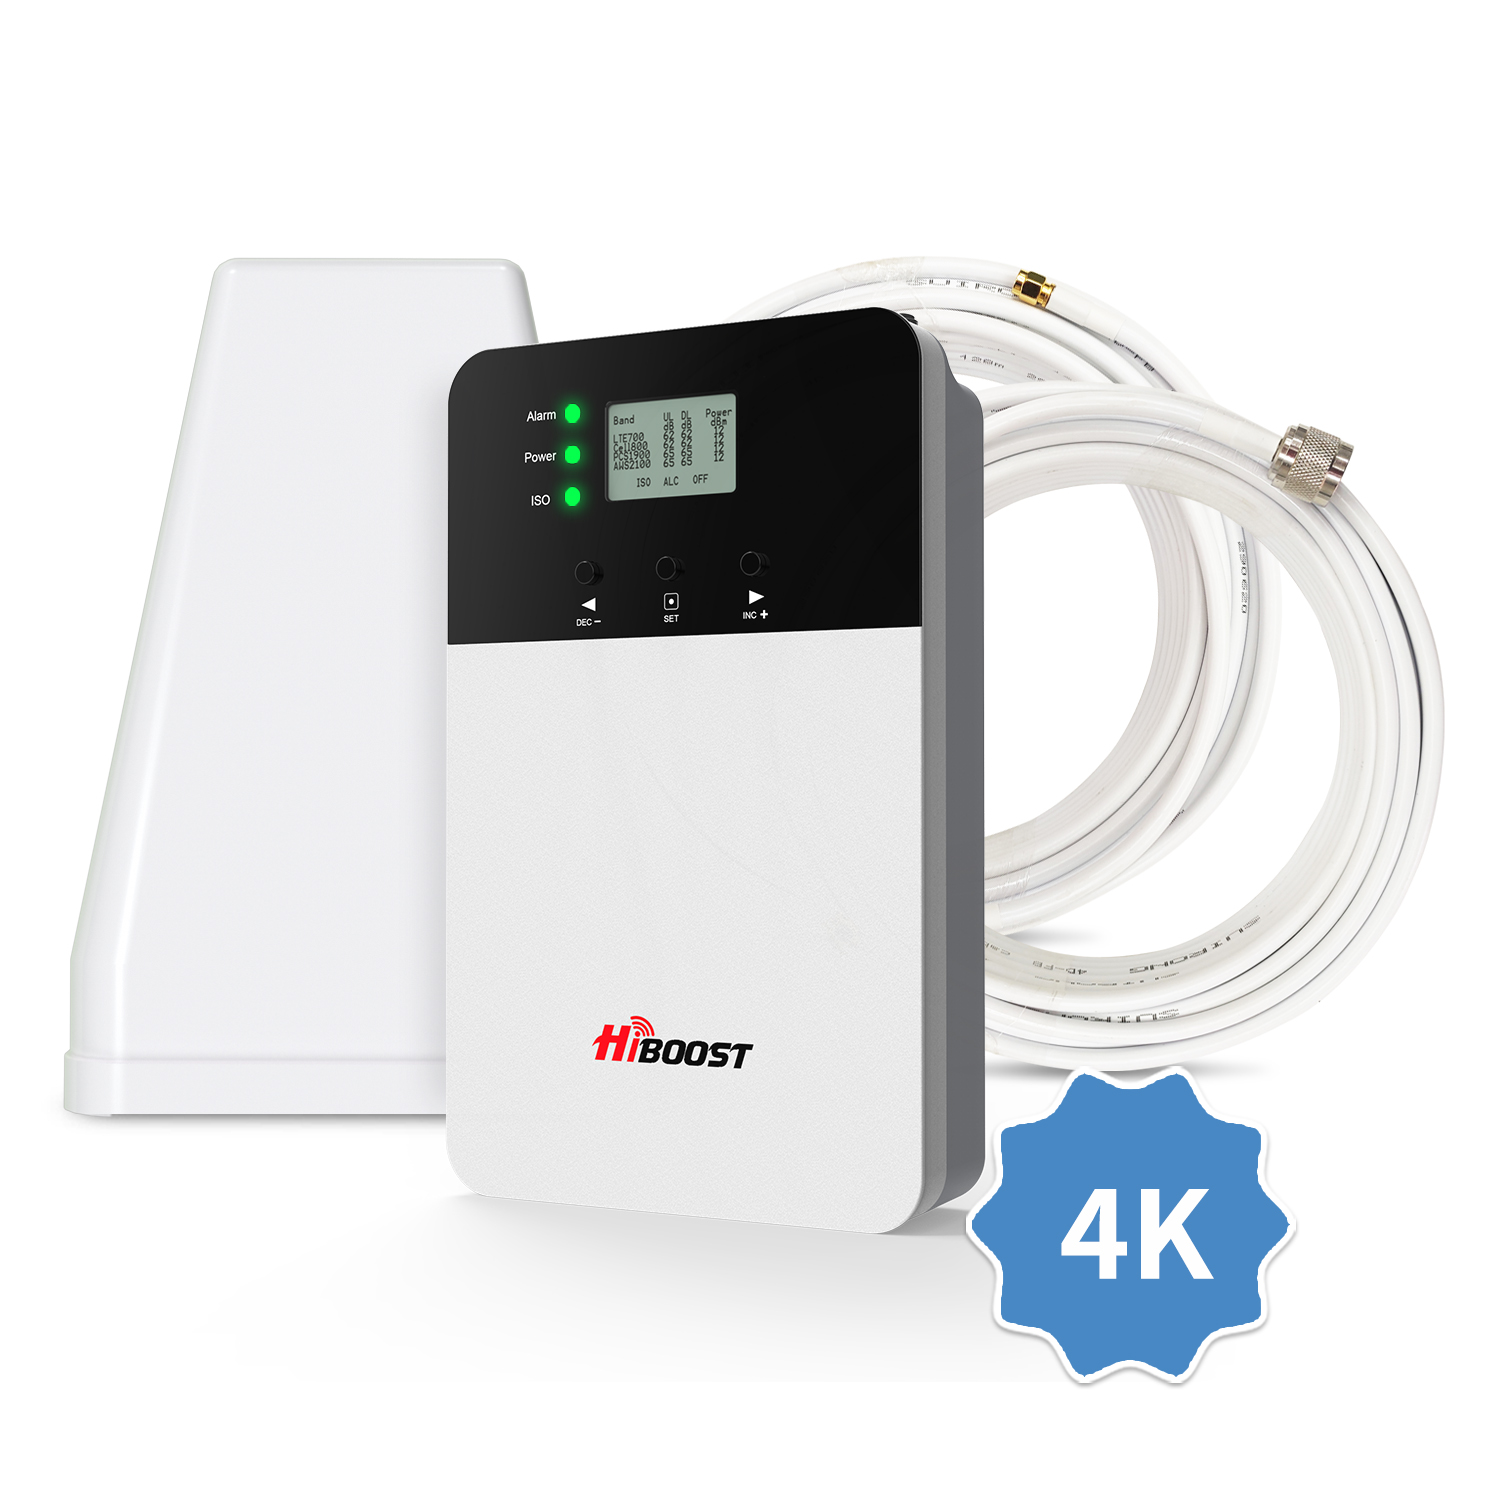 HiBoost 4K Plus Home Cell Phone Signal Booster with Built-in Antenna for Home and Office, Up to 4,000 sq. ft - image 1 of 7